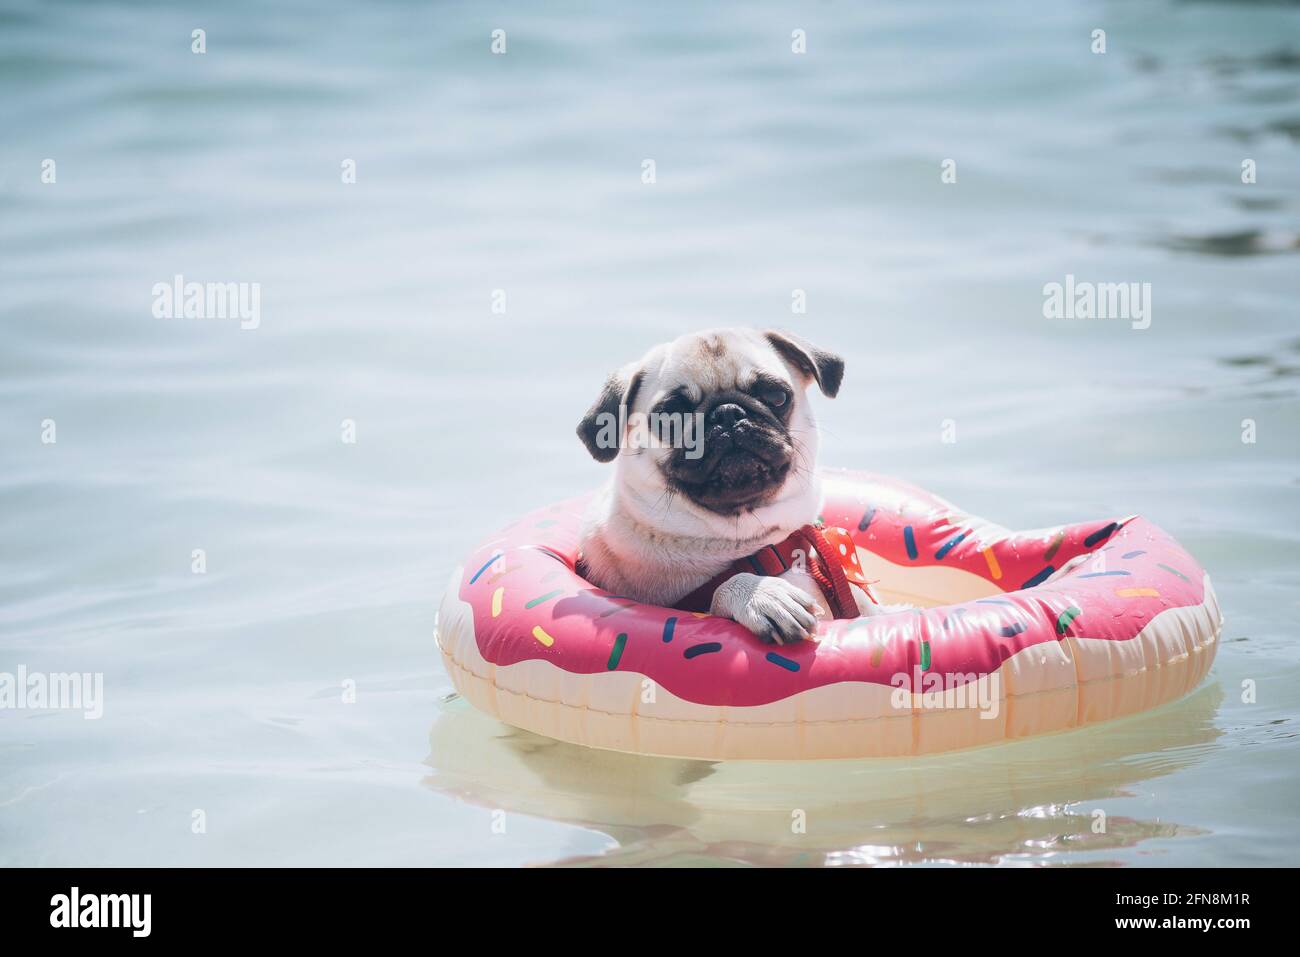 A dog of the Mops breed floats on an inflatable ring in the sea Stock Photo